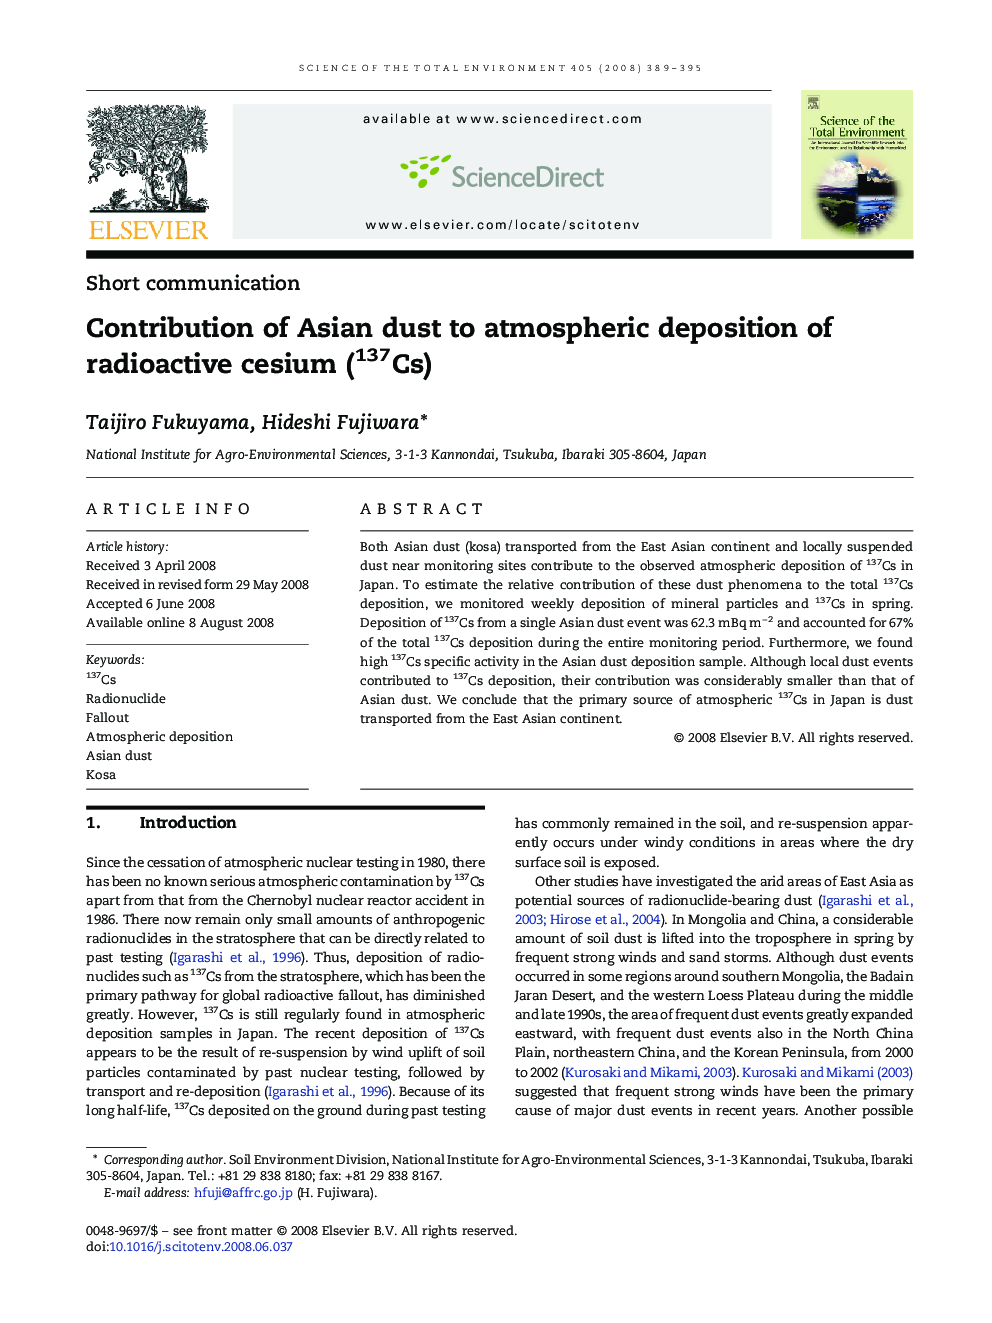 Contribution of Asian dust to atmospheric deposition of radioactive cesium (137Cs)